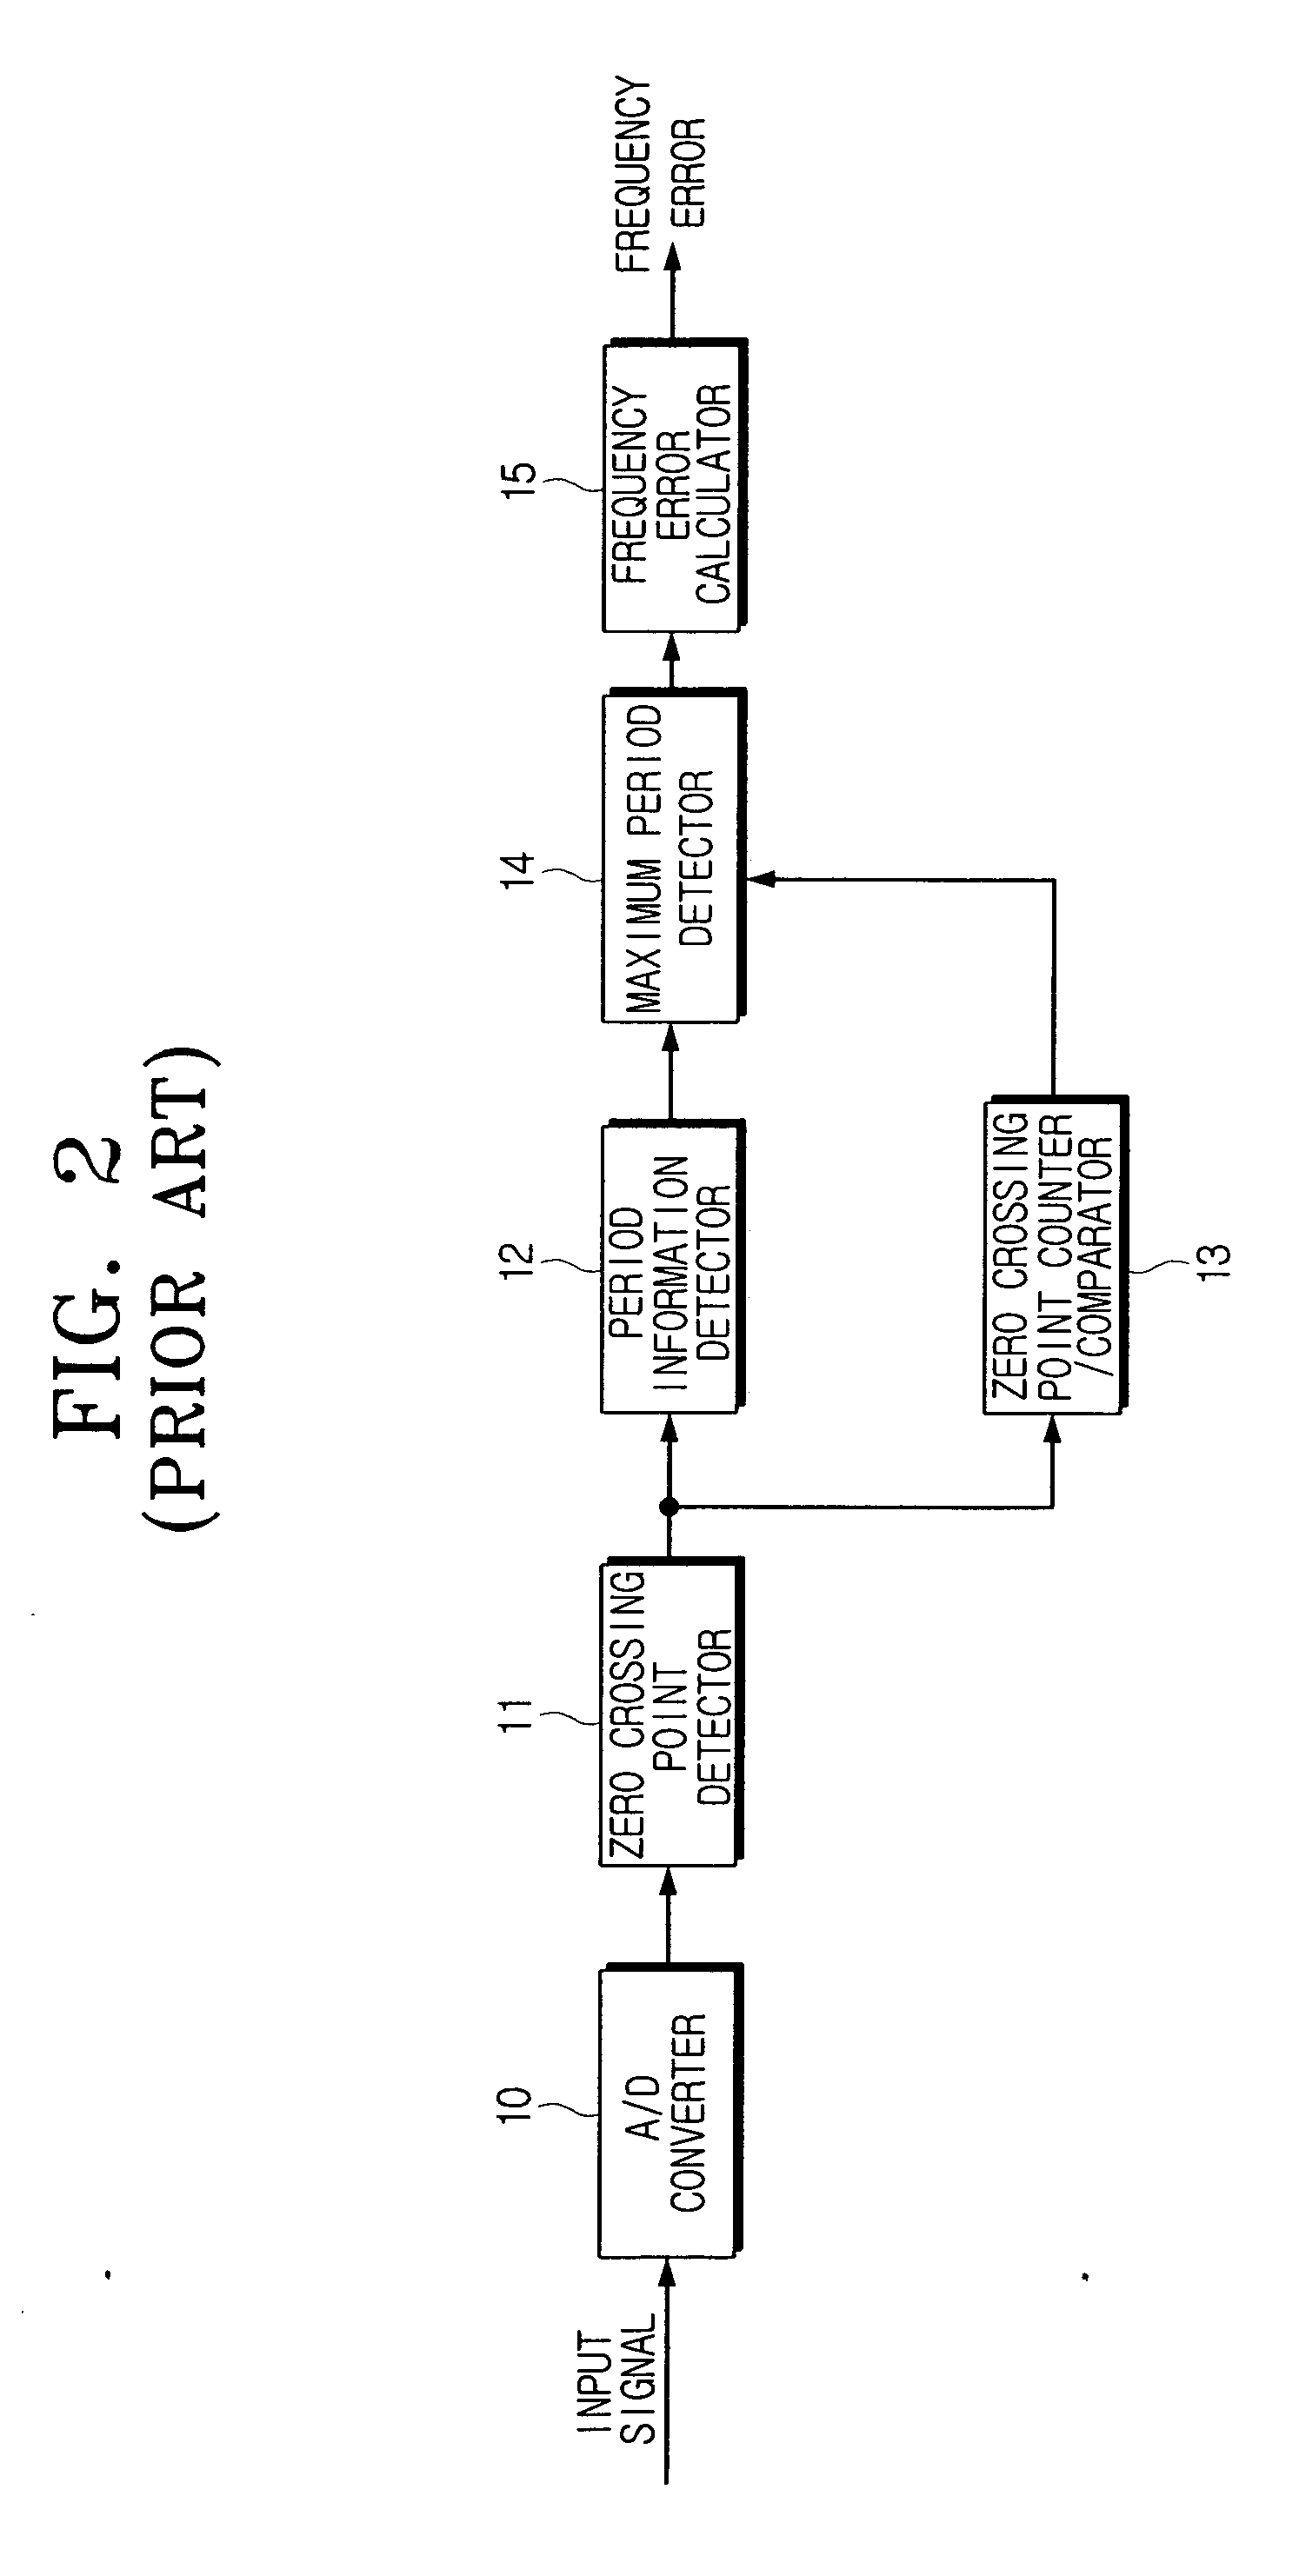 Frequency error detection apparatus and method based on histogram information on input signals